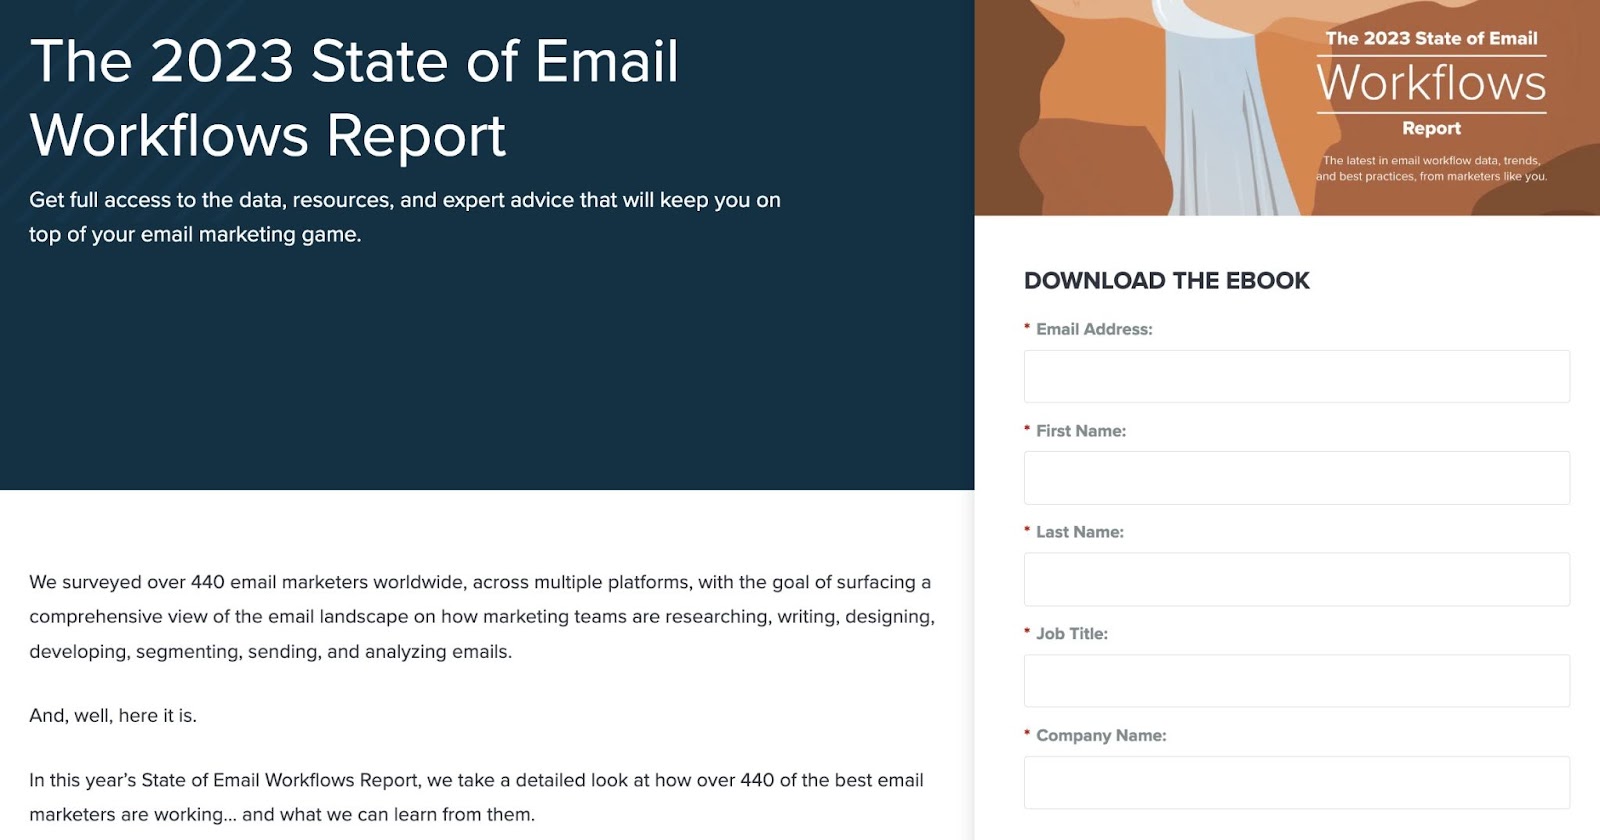 "The 2023 State of Email Workflows Report" download page